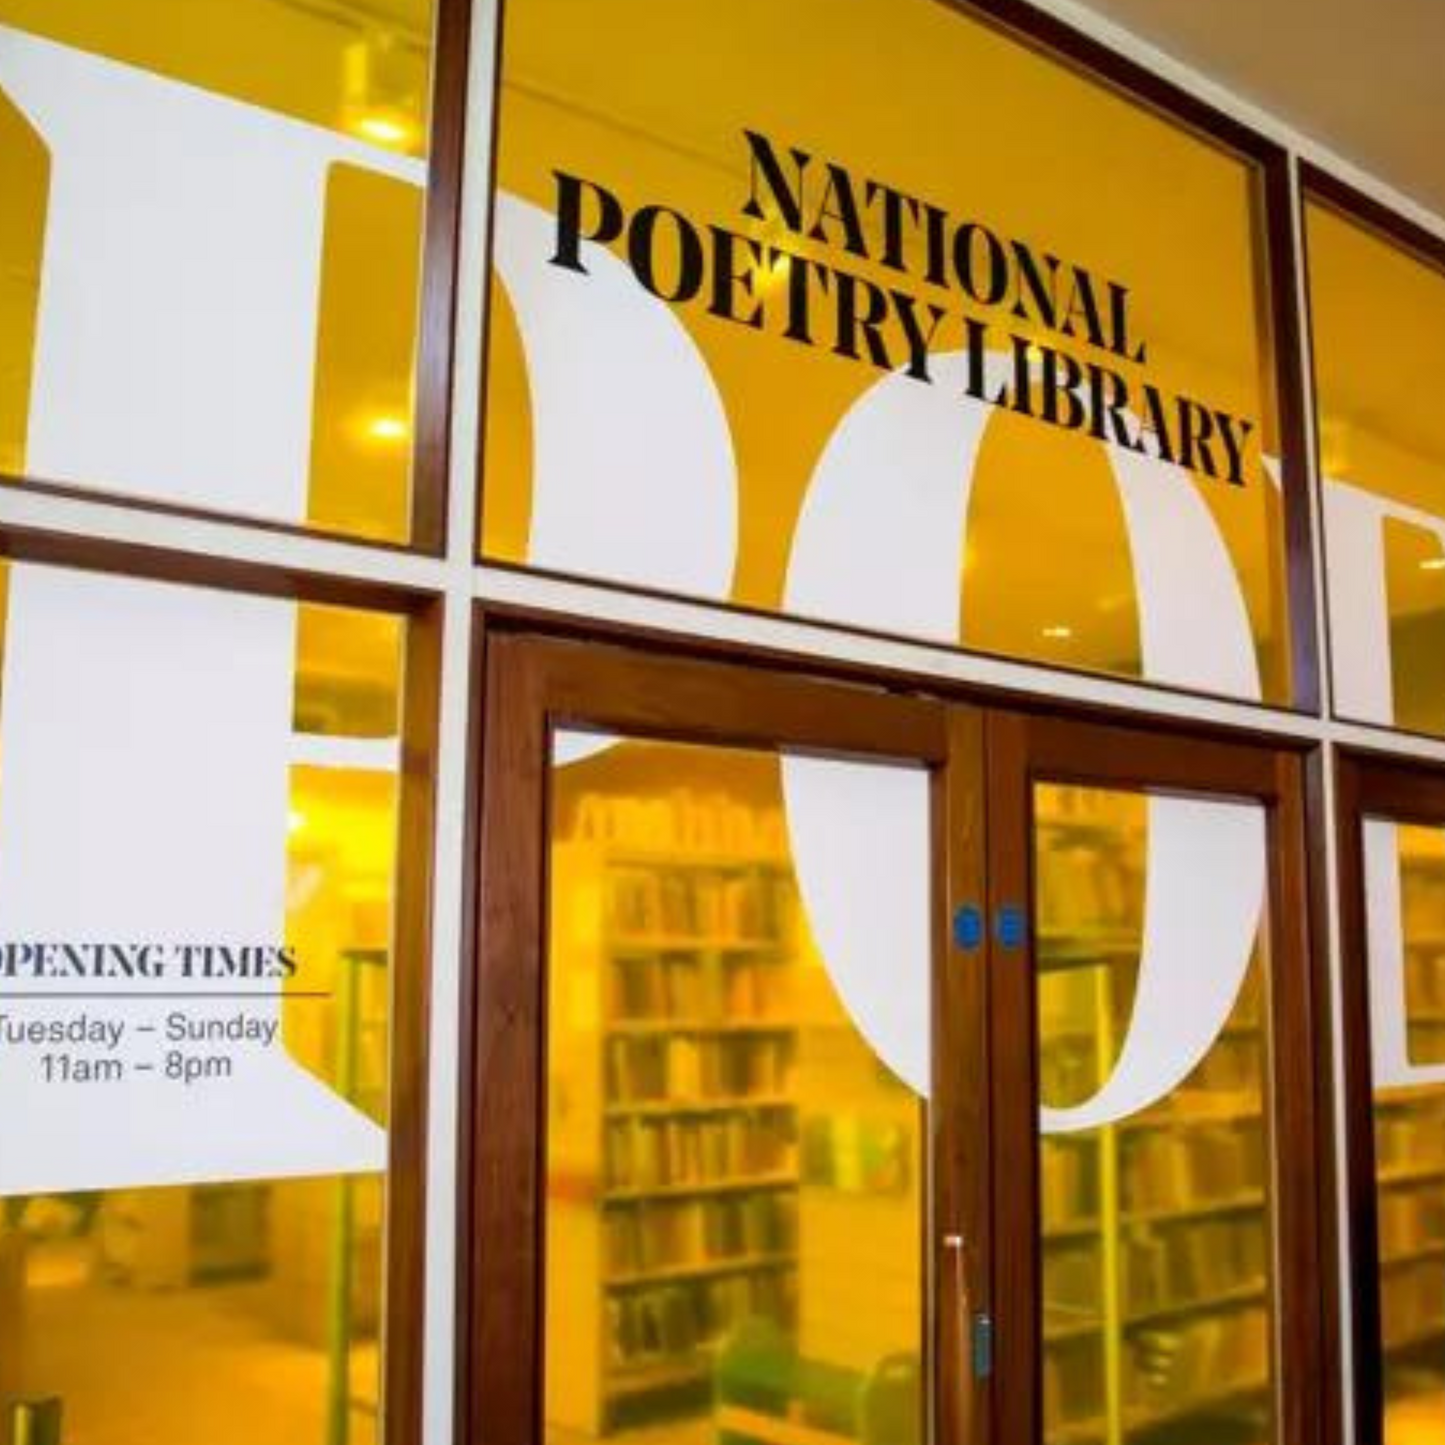 Photograph displaying the entrance to the National Poetry Library